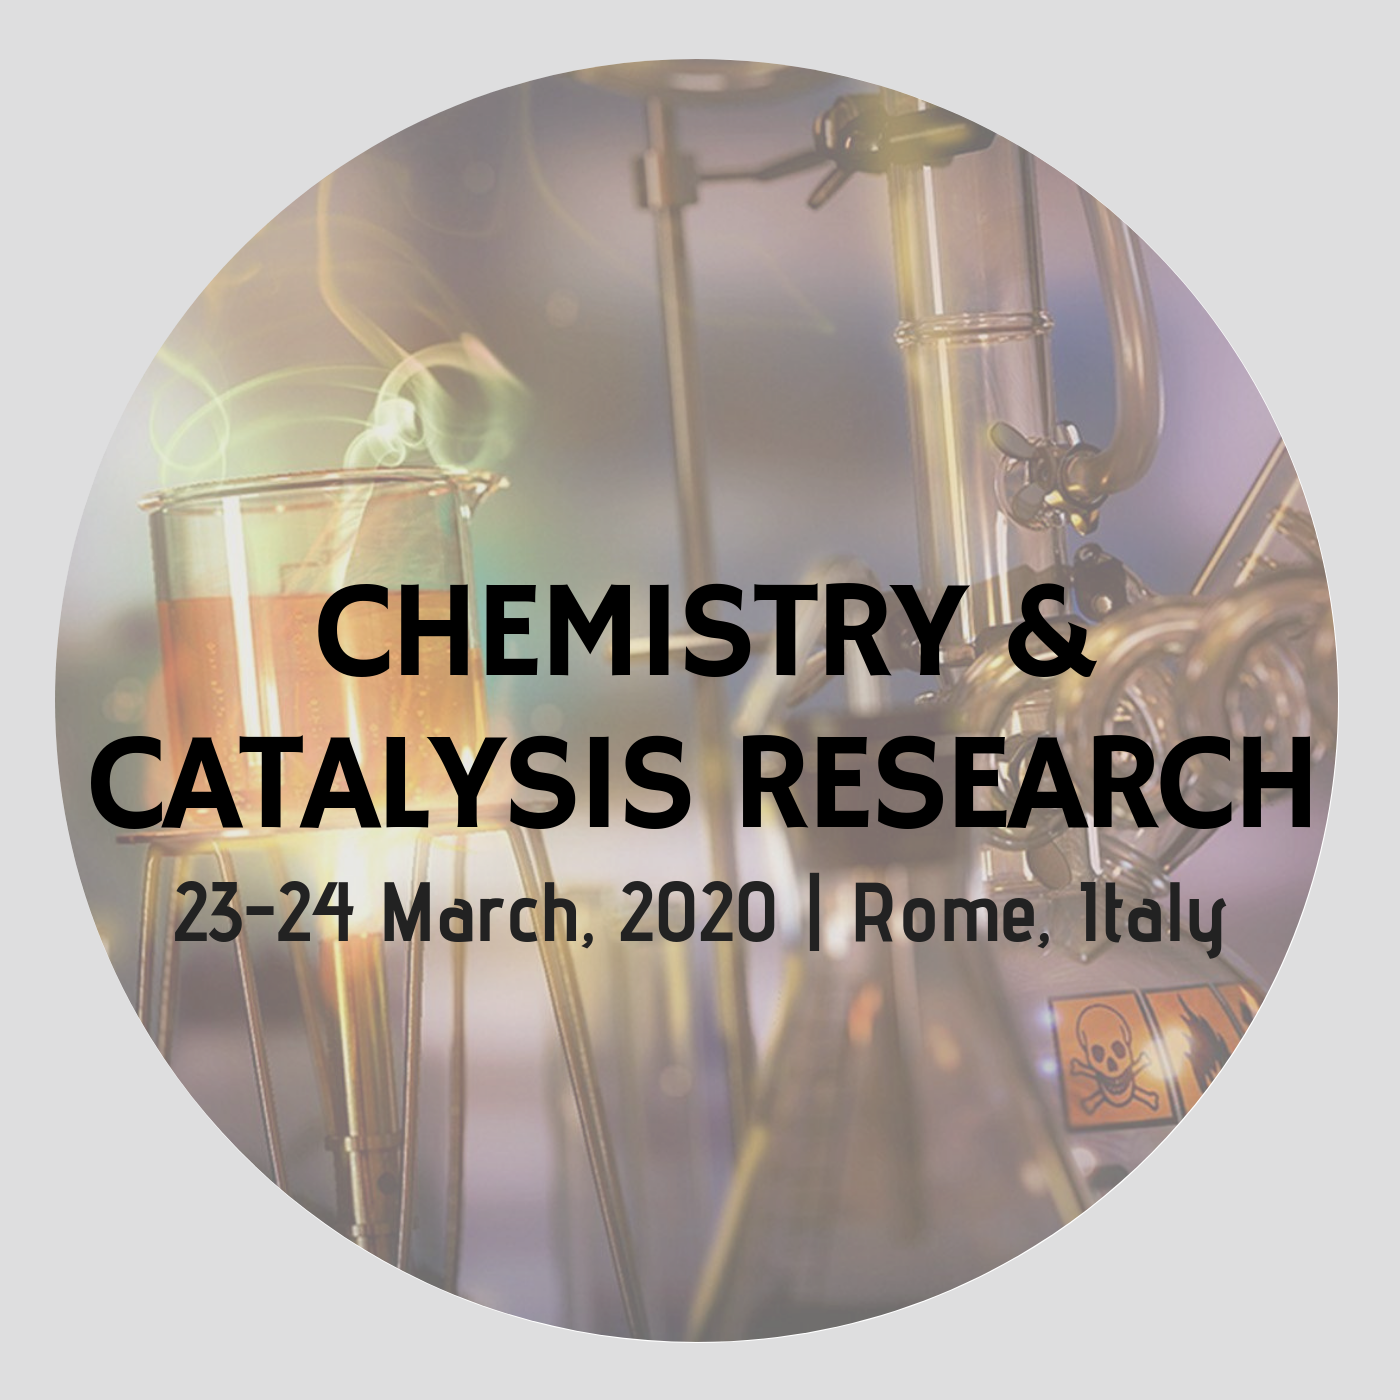 Chemistry & Catalysis Research